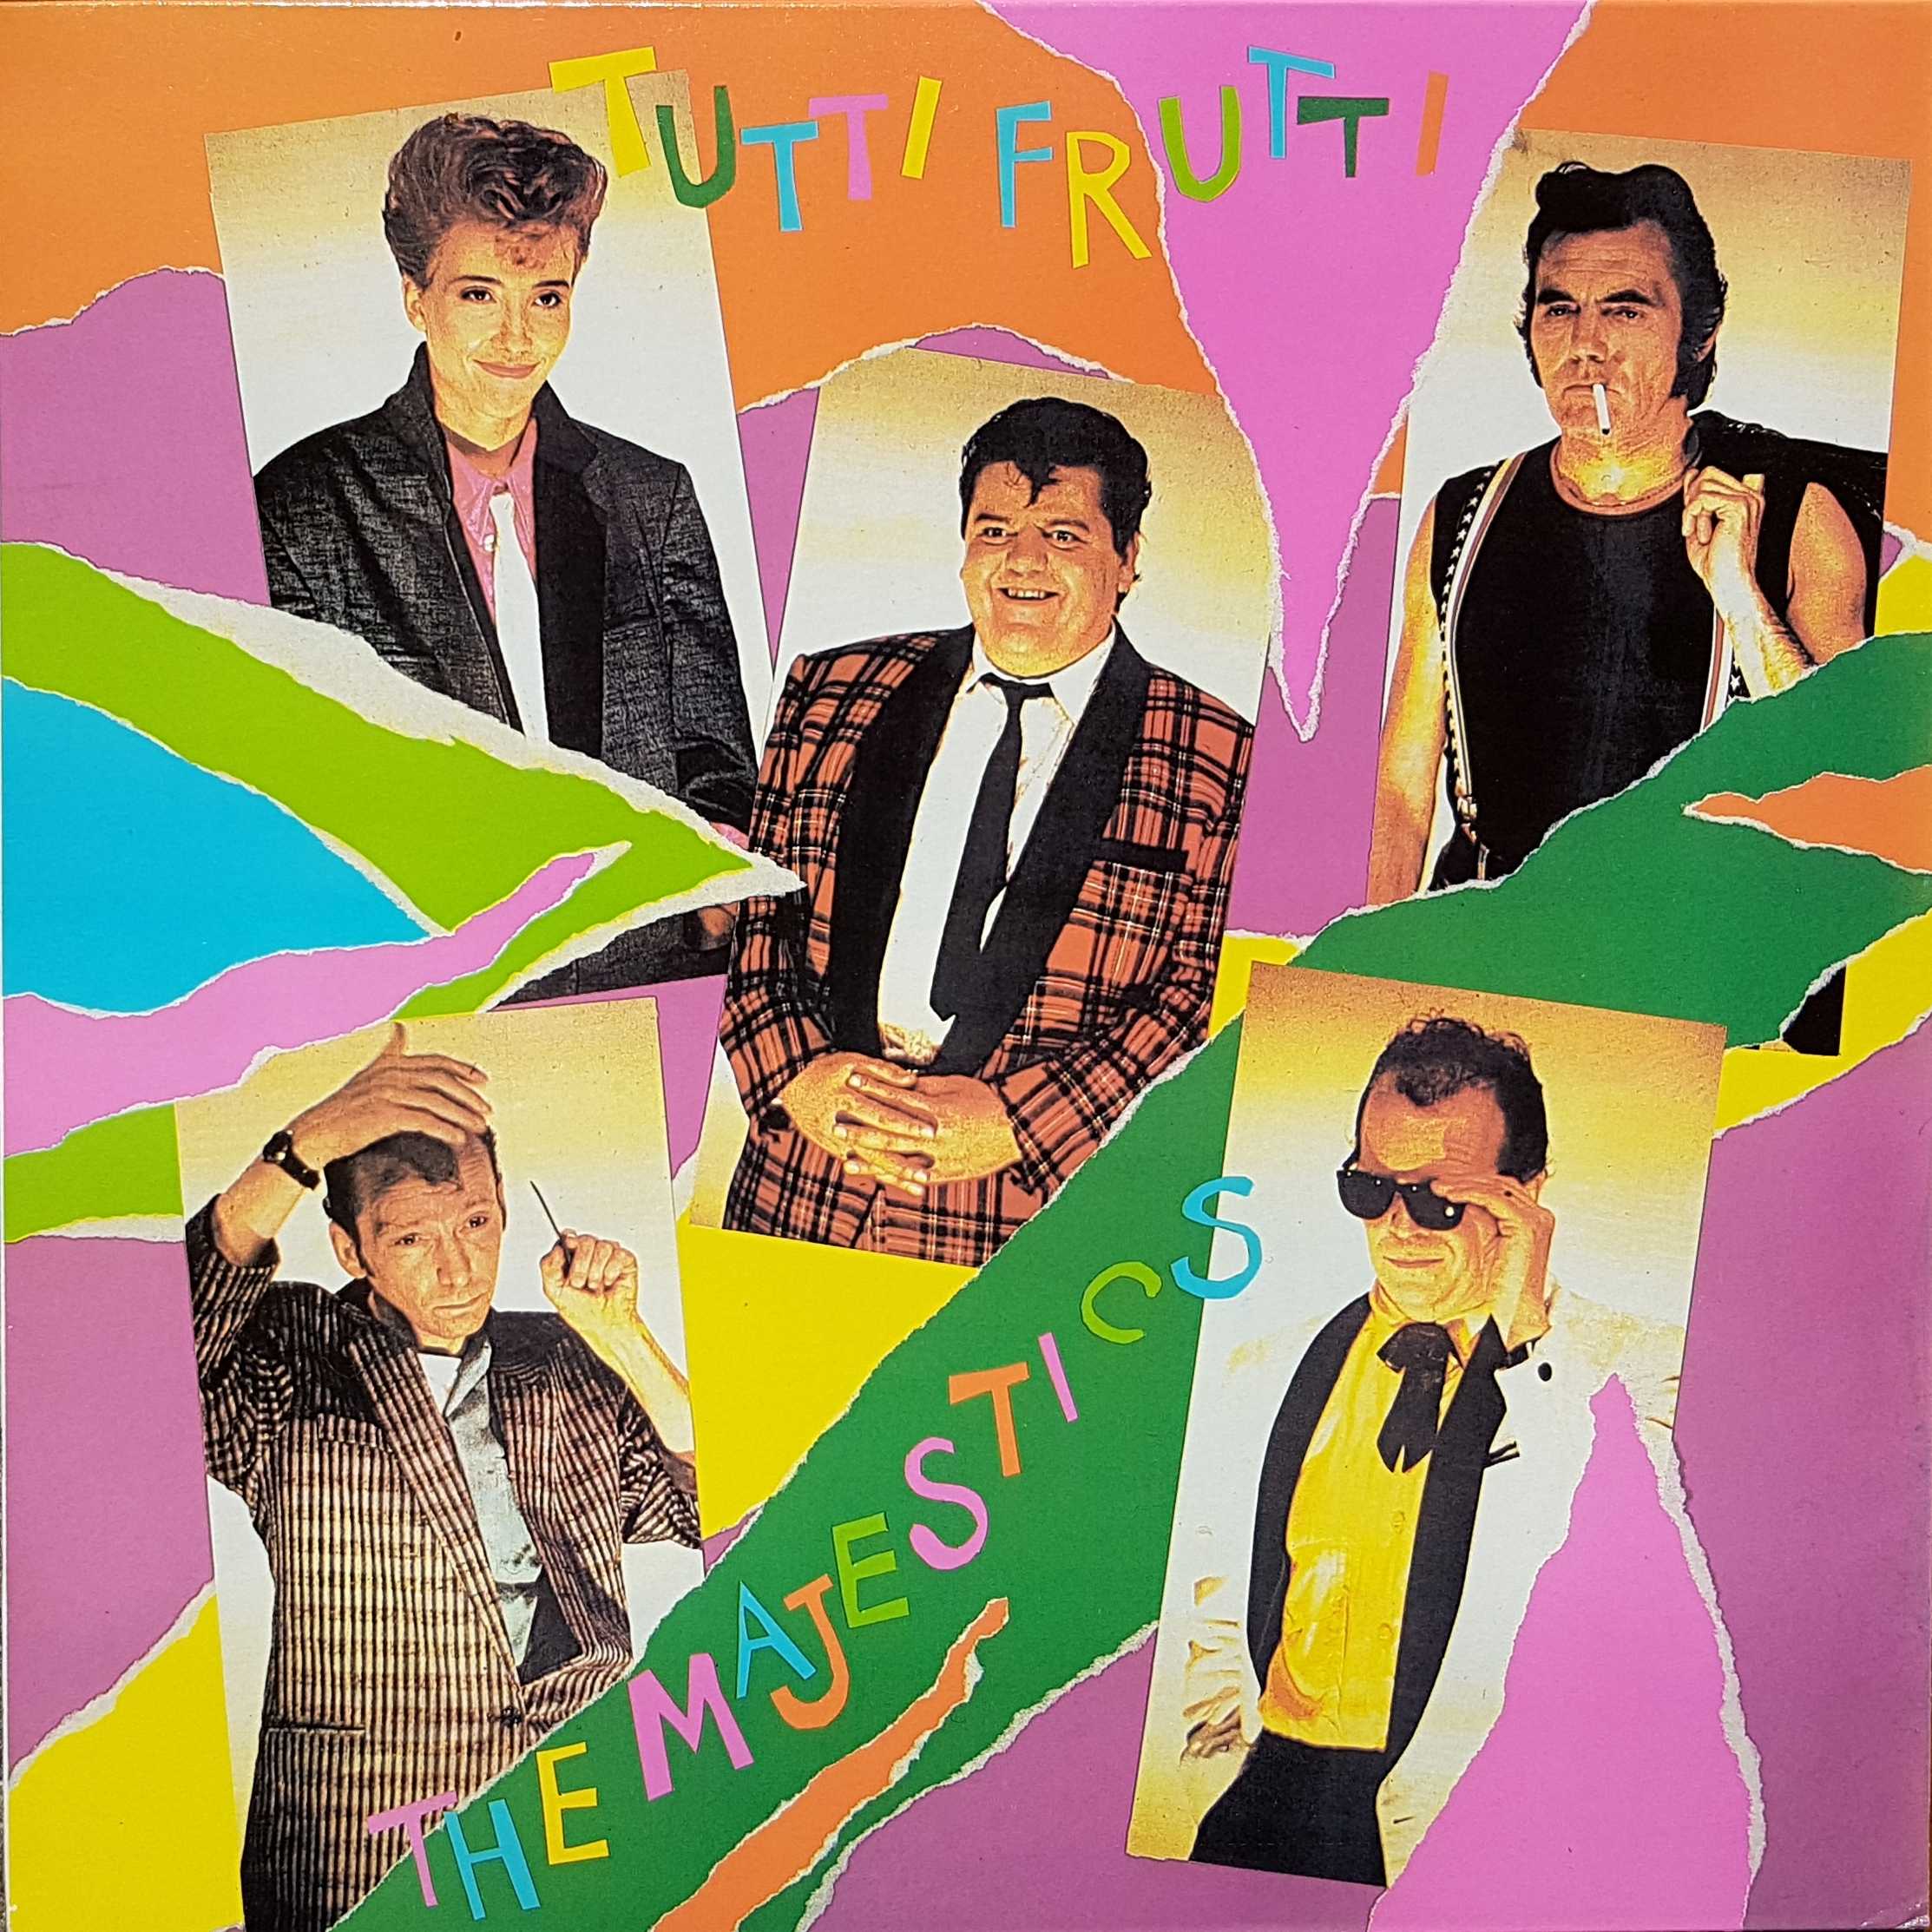 Picture of REN 629 Tutti frutti - The Majestics by artist Various from the BBC albums - Records and Tapes library